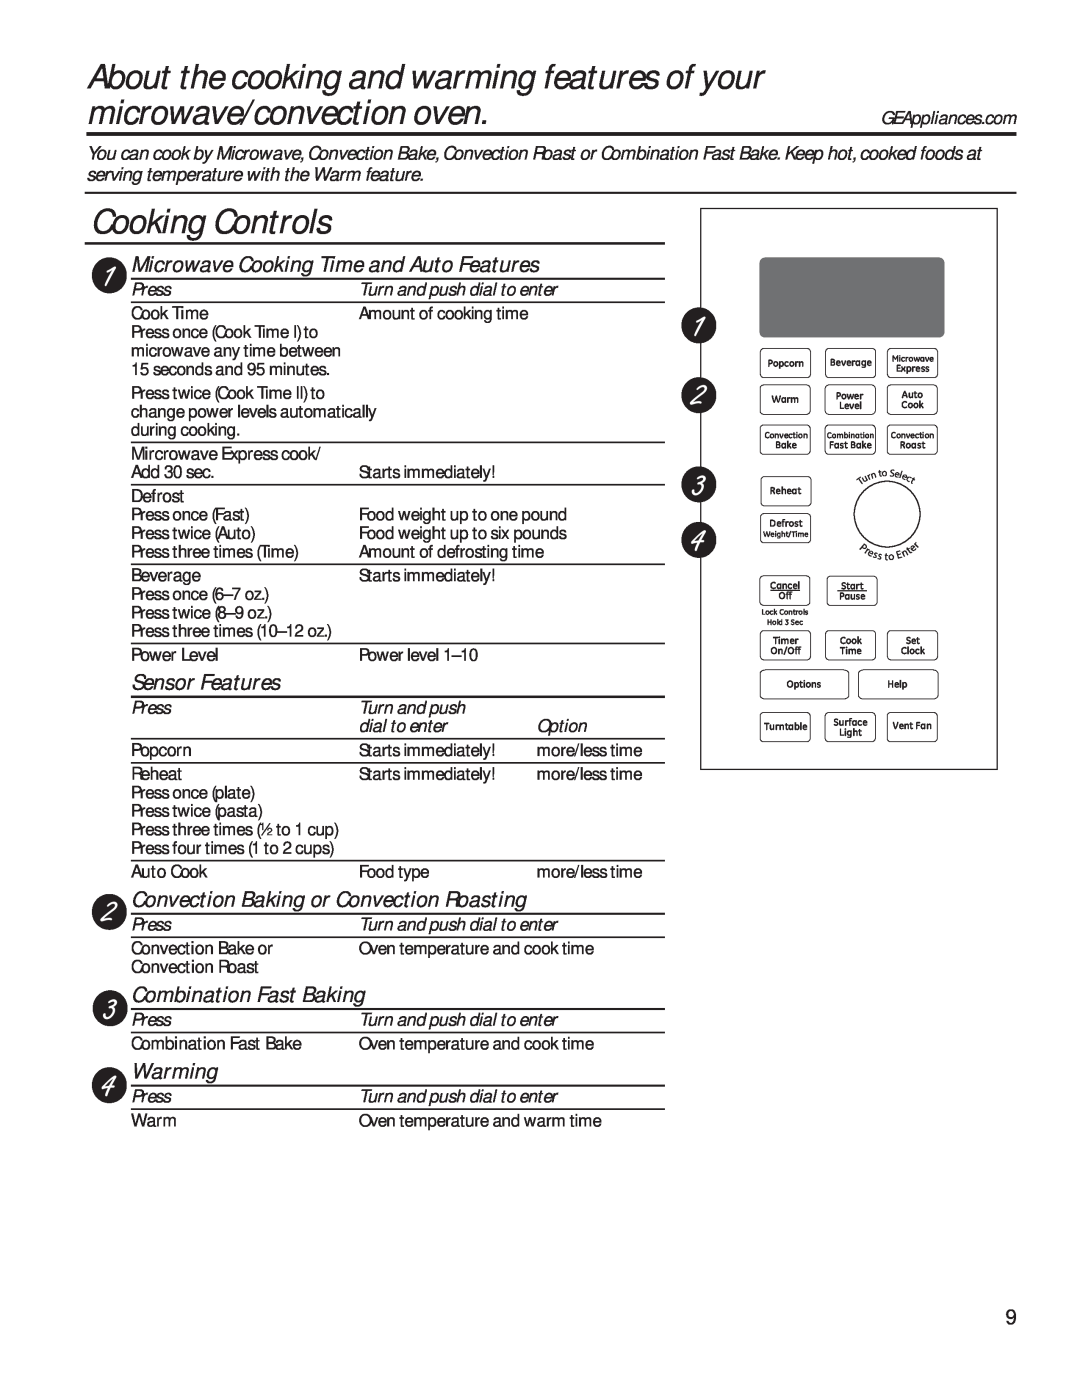 GE PVM9179 About the cooking and warming features of your, microwave/convection oven, Cooking Controls, Sensor Features 